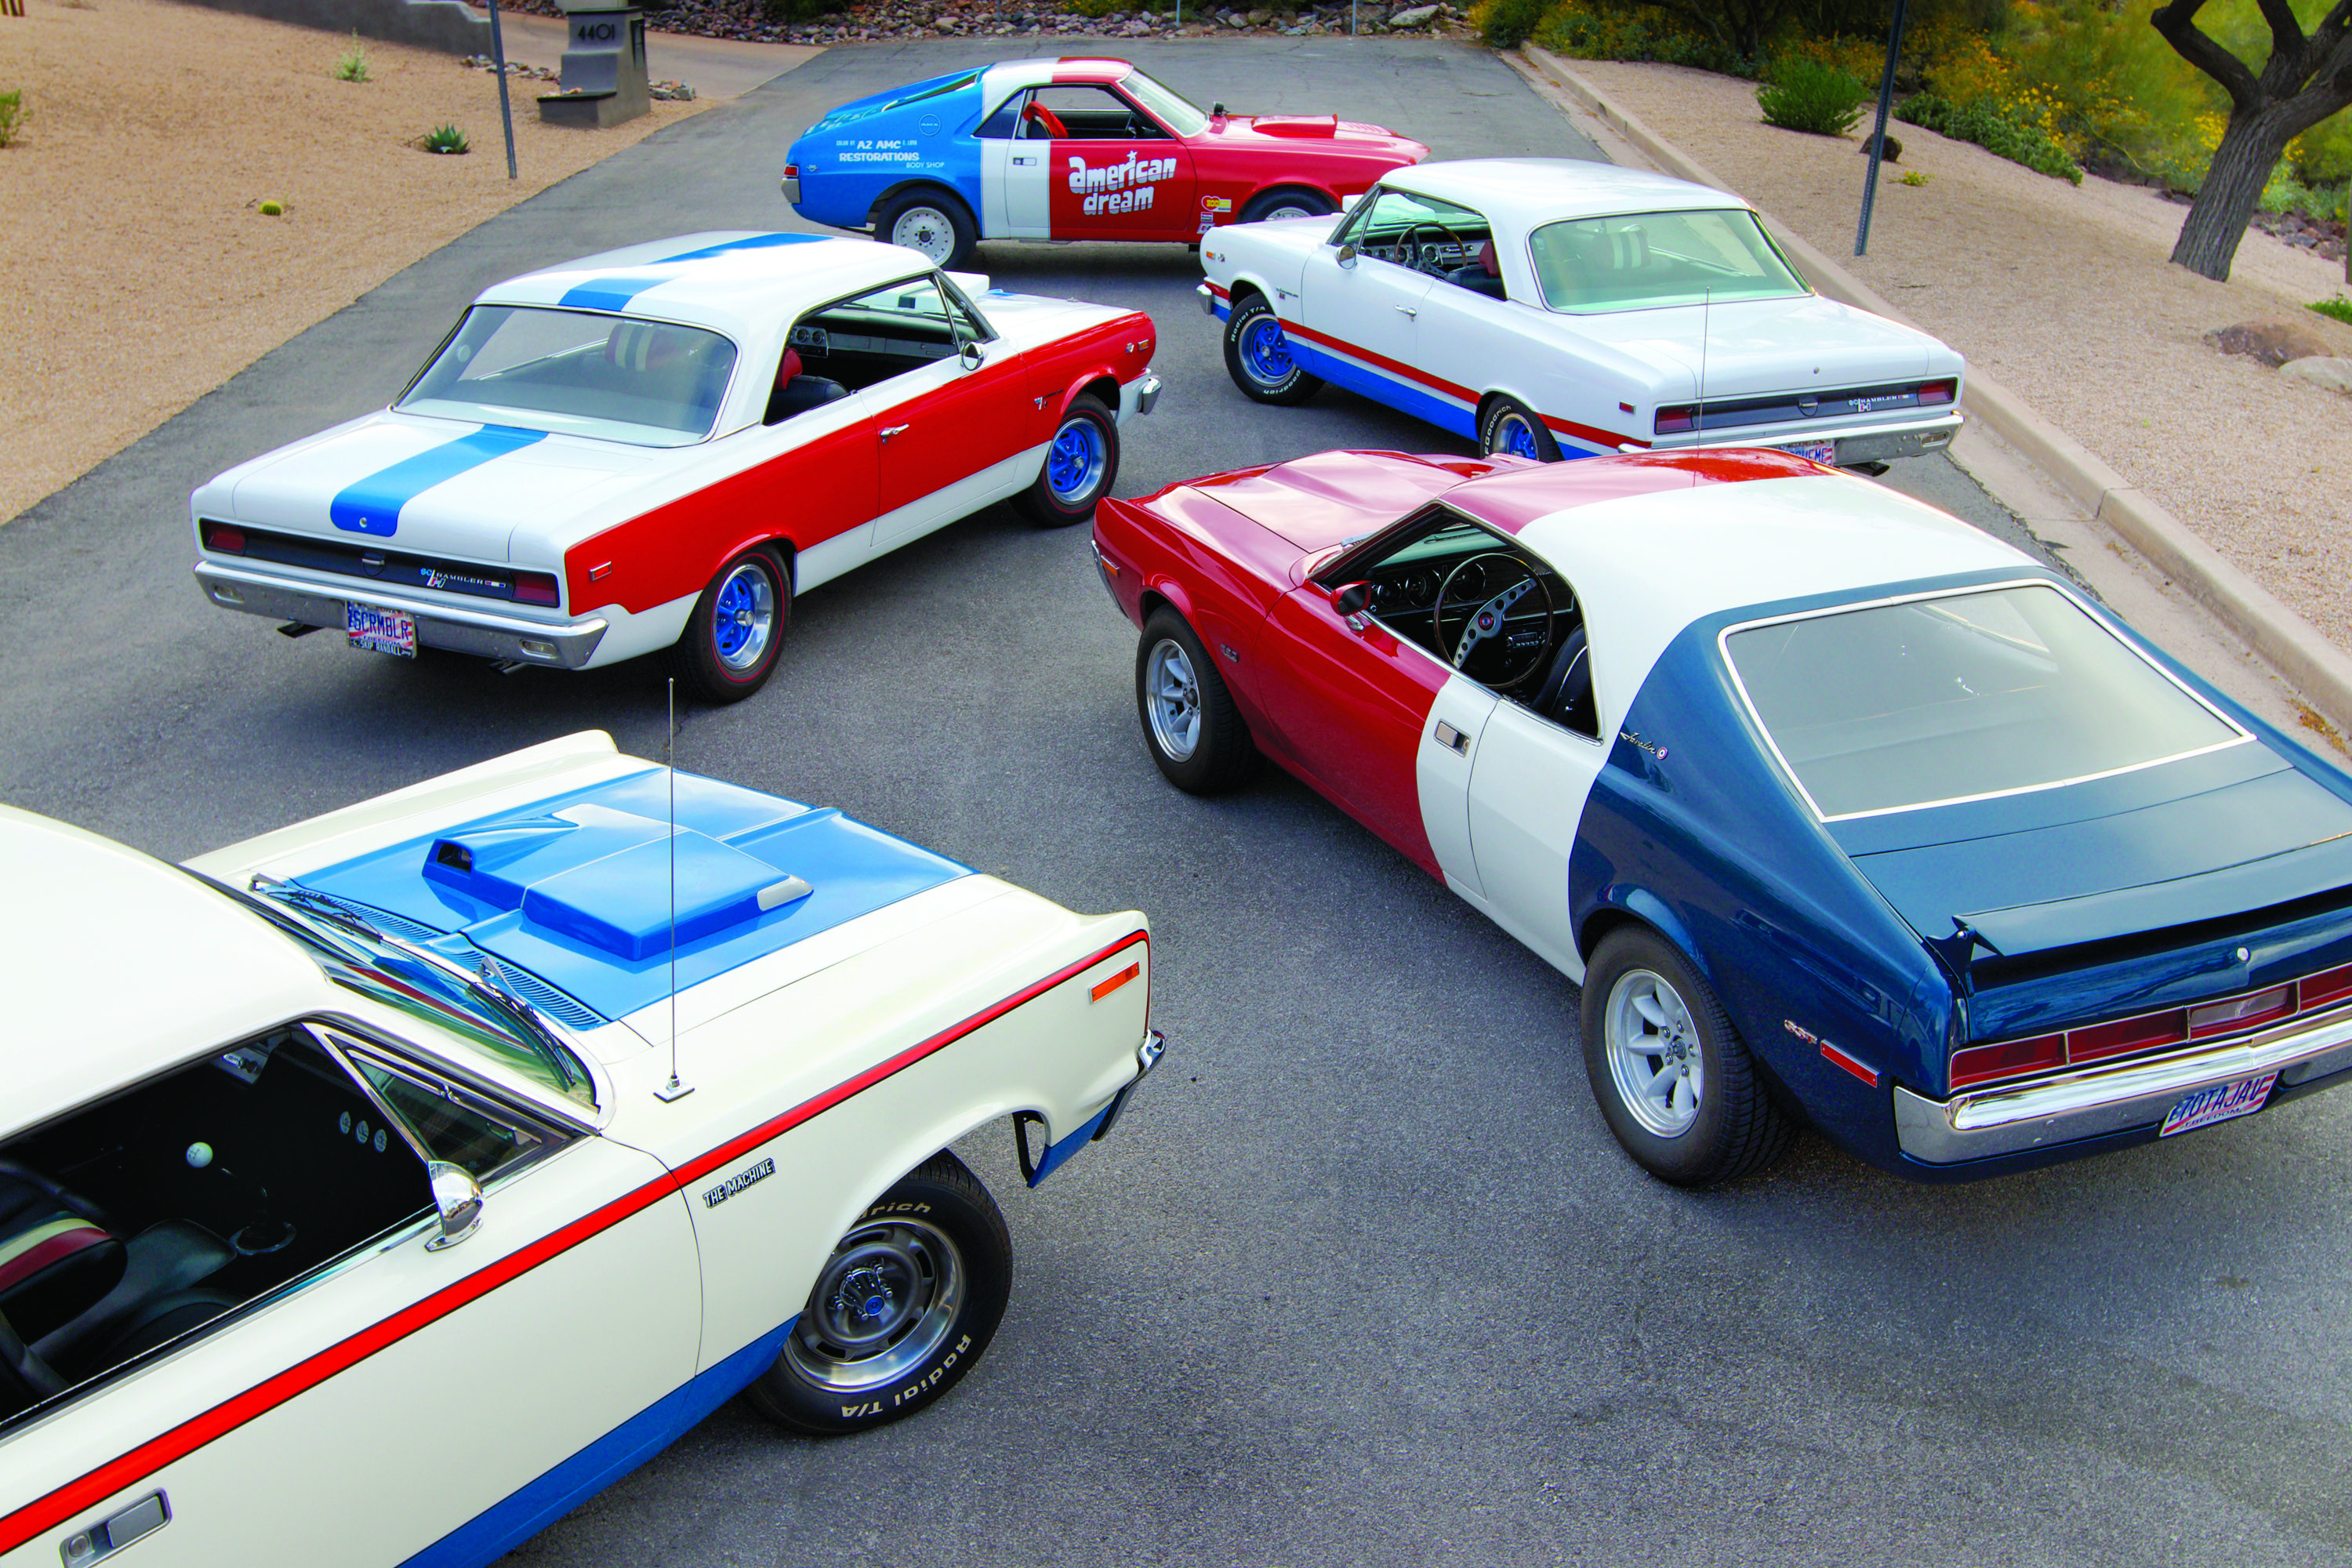 All Five Factory-Sold Red, White and Blue AMC Performance Cars, Collected Under One Roof